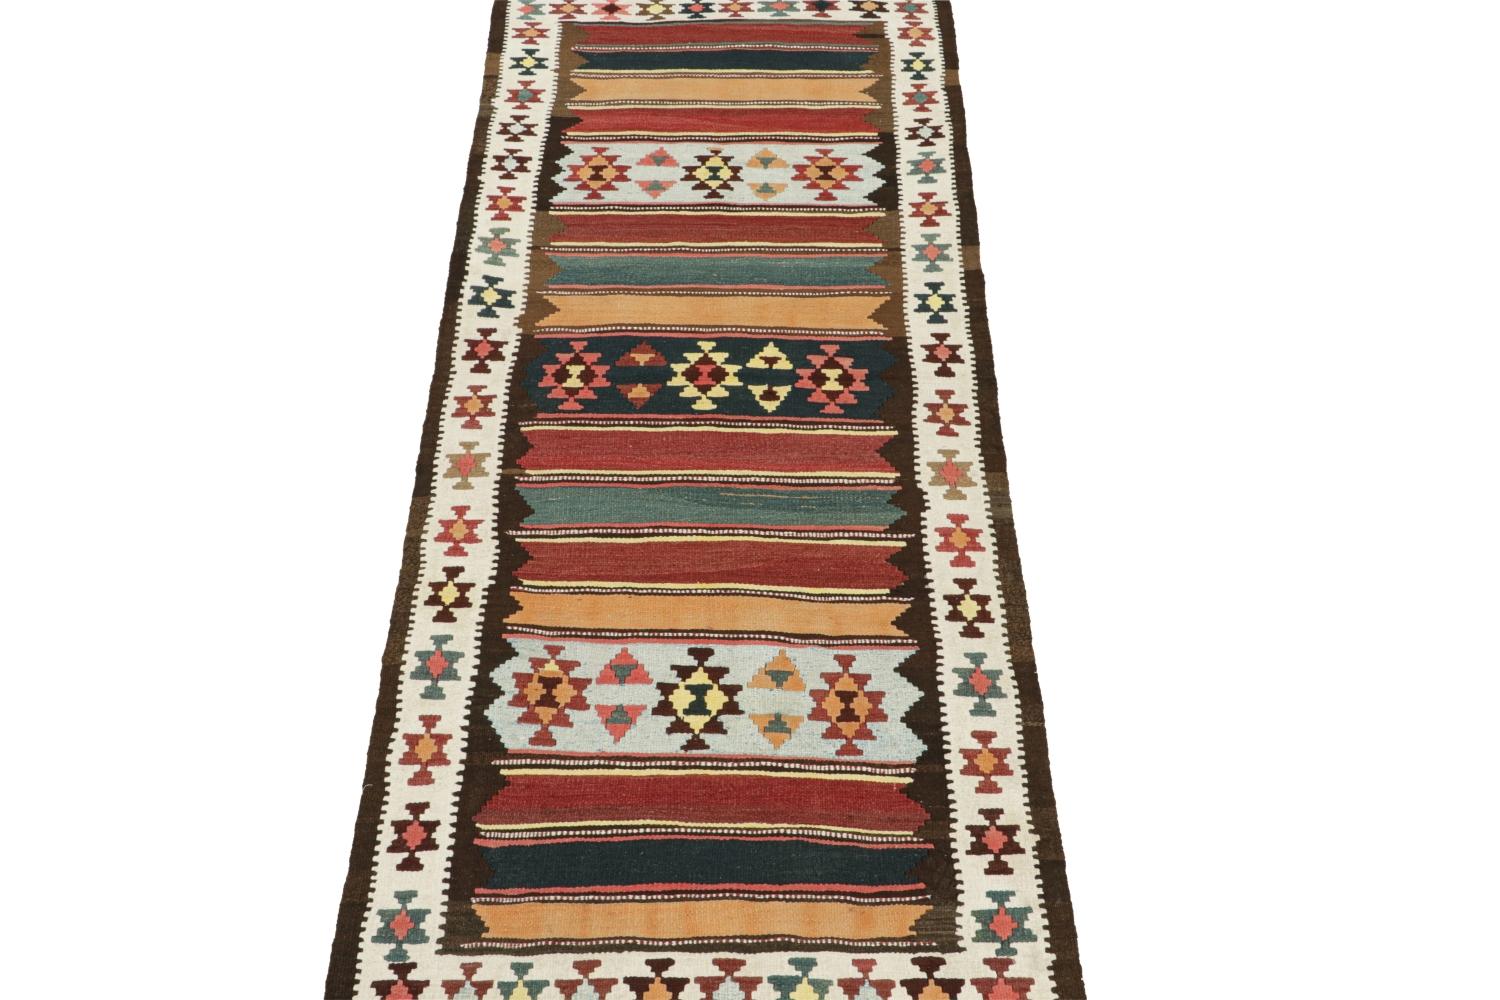 Hand-Knotted Vintage Shahsavan Persian Kilim in Stripes & Geometric Patterns For Sale